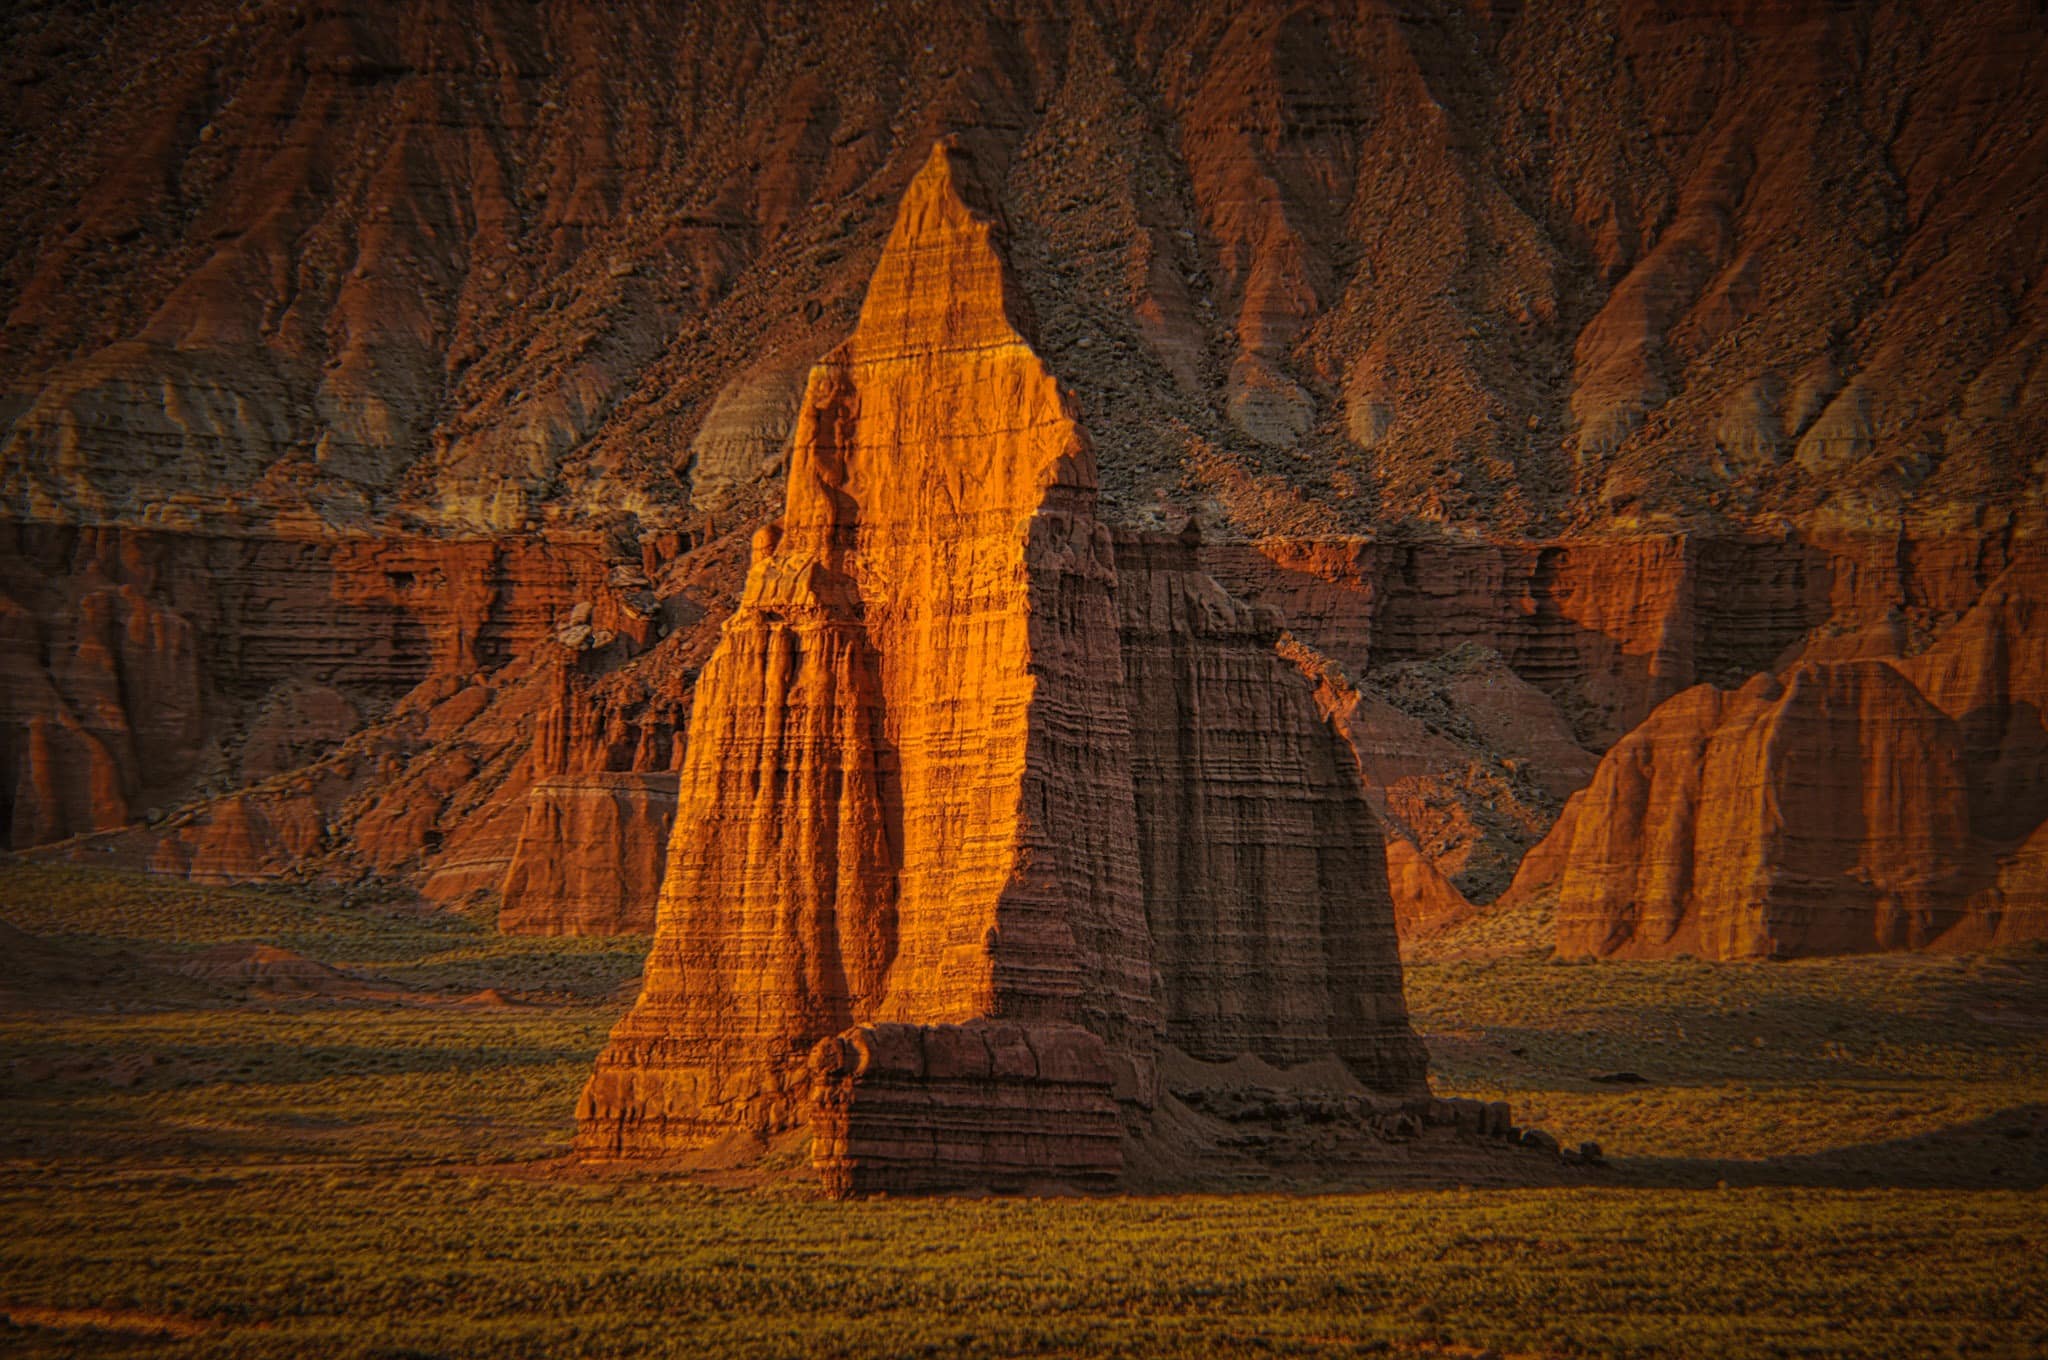 The summer dawn illuminates the face of the Temple of the Sun in Cathedral Valley, Capitol Reef National Park, Utah.